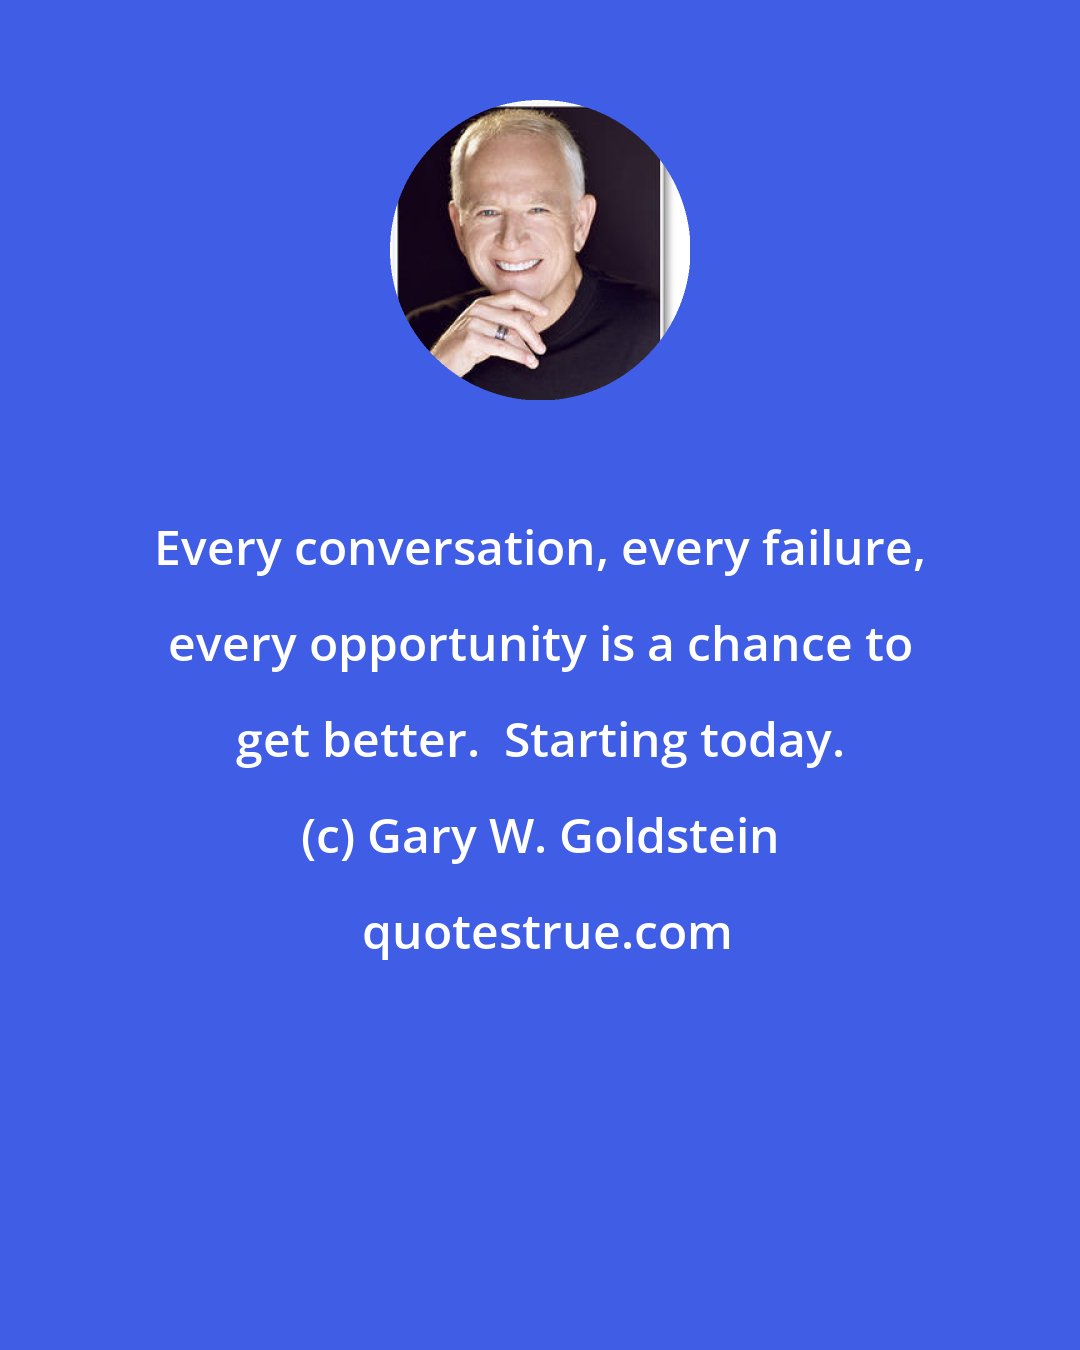 Gary W. Goldstein: Every conversation, every failure, every opportunity is a chance to get better.  Starting today.